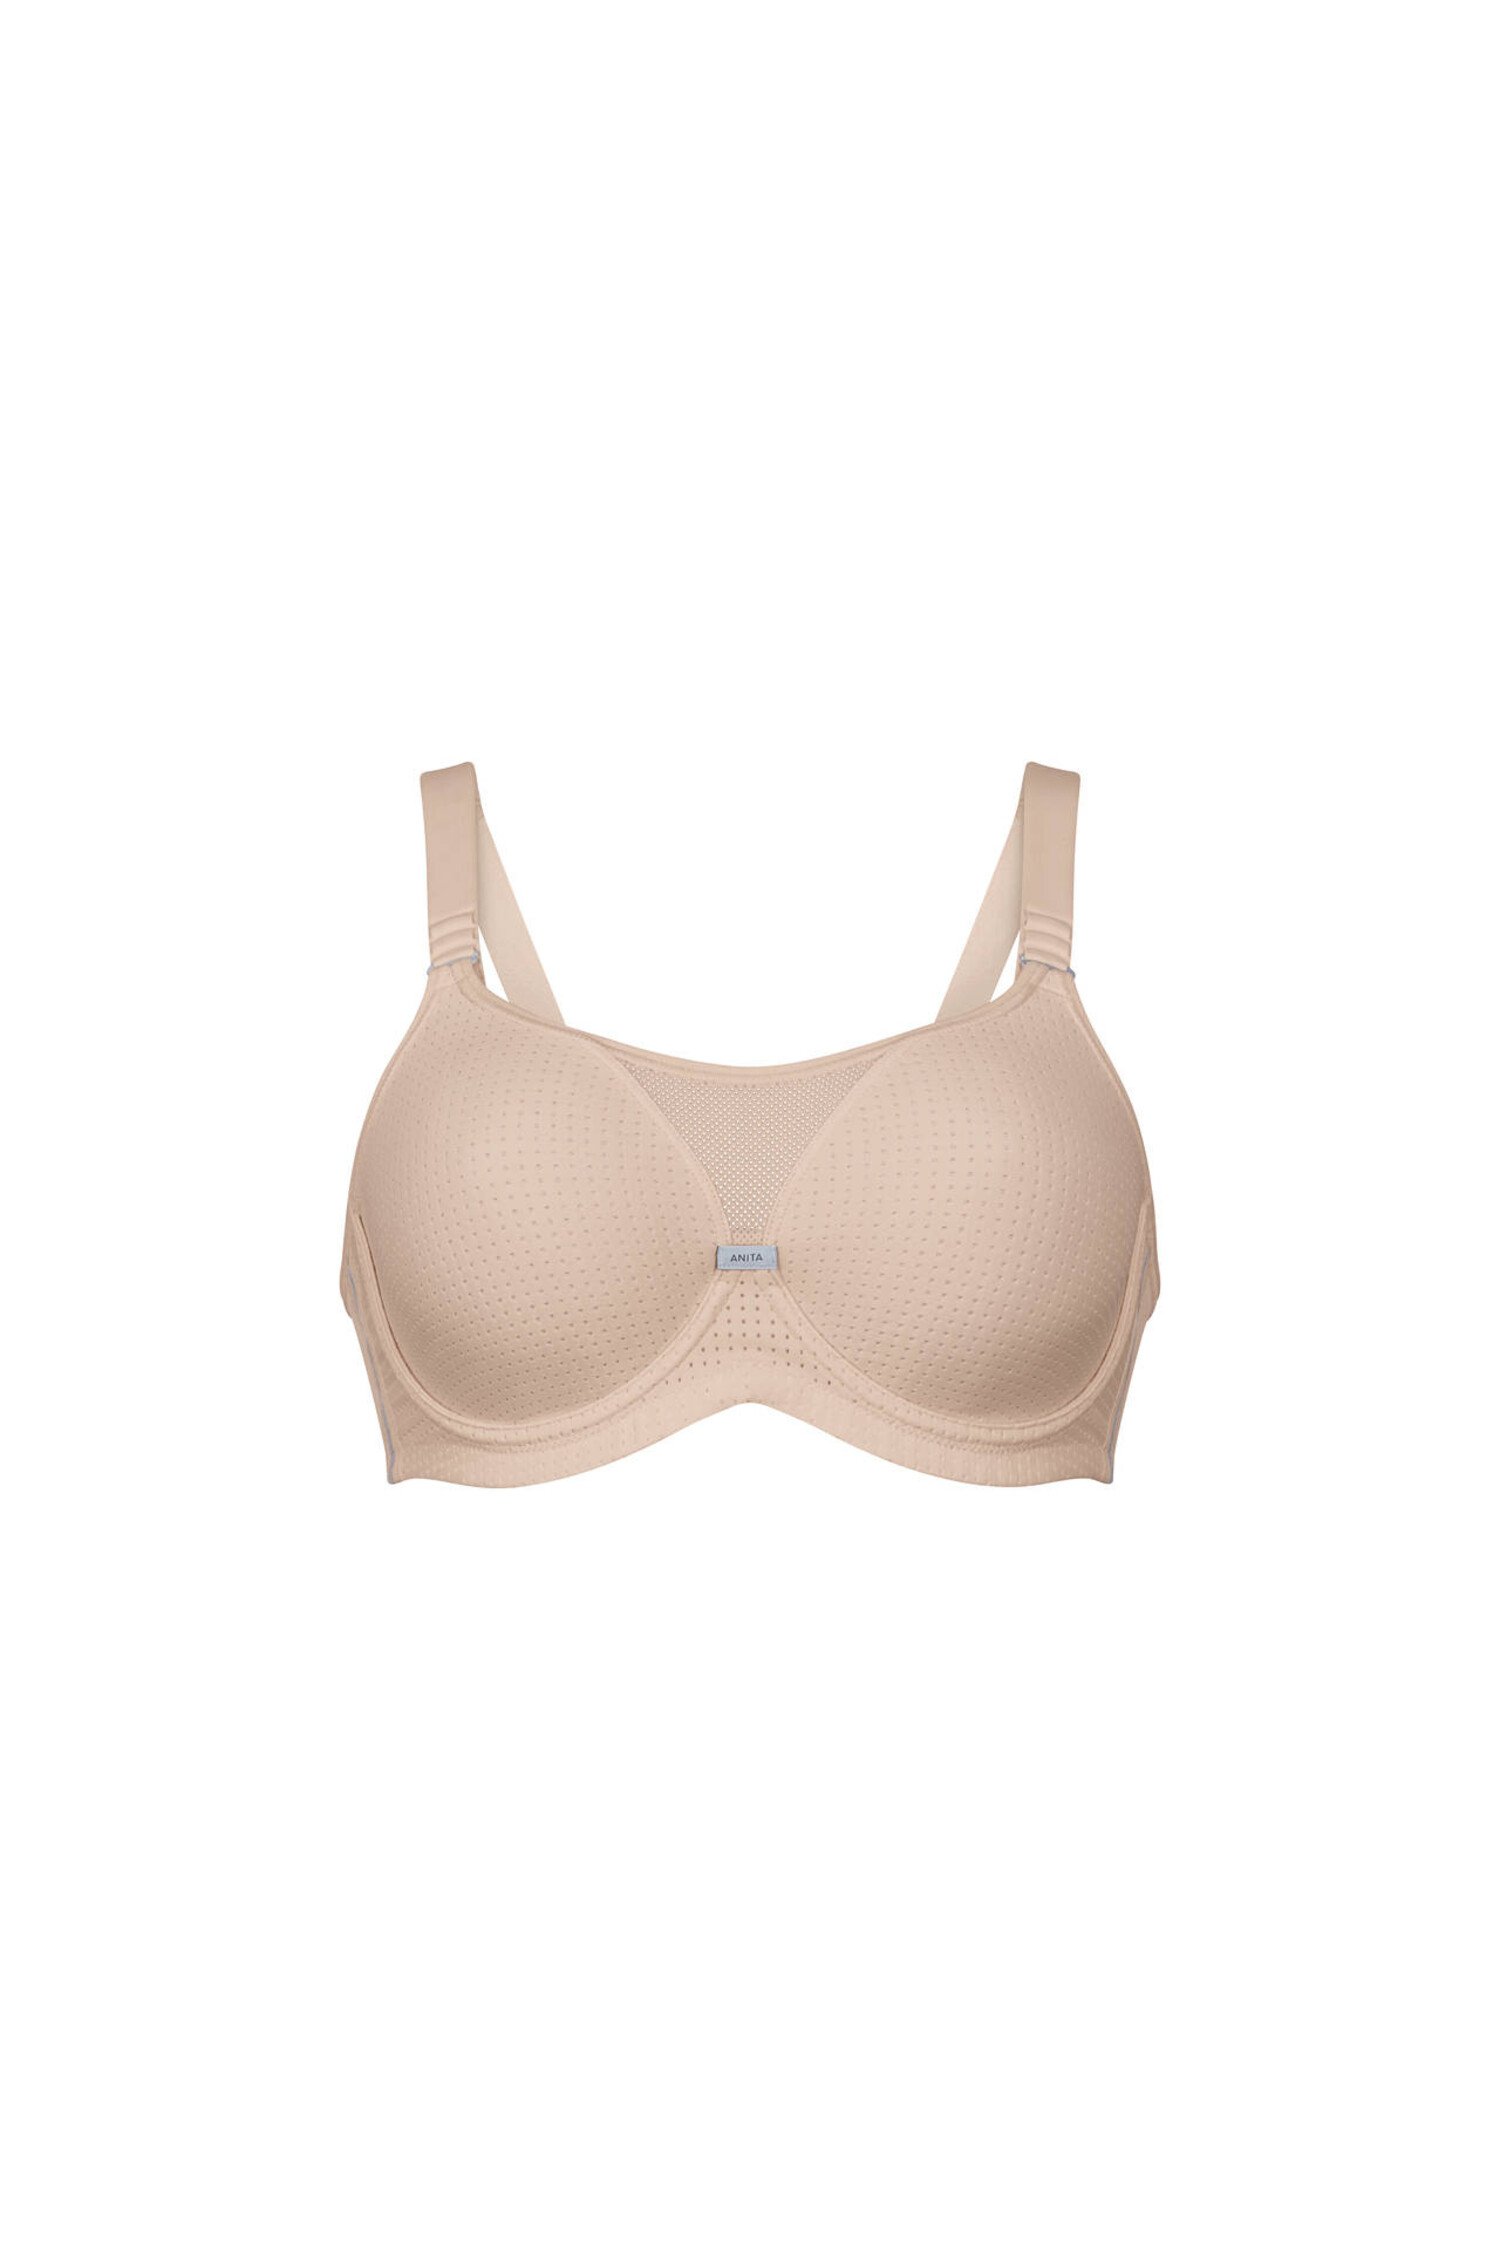 Cotton White Color Sports Bra at Rs 185/piece in Surat